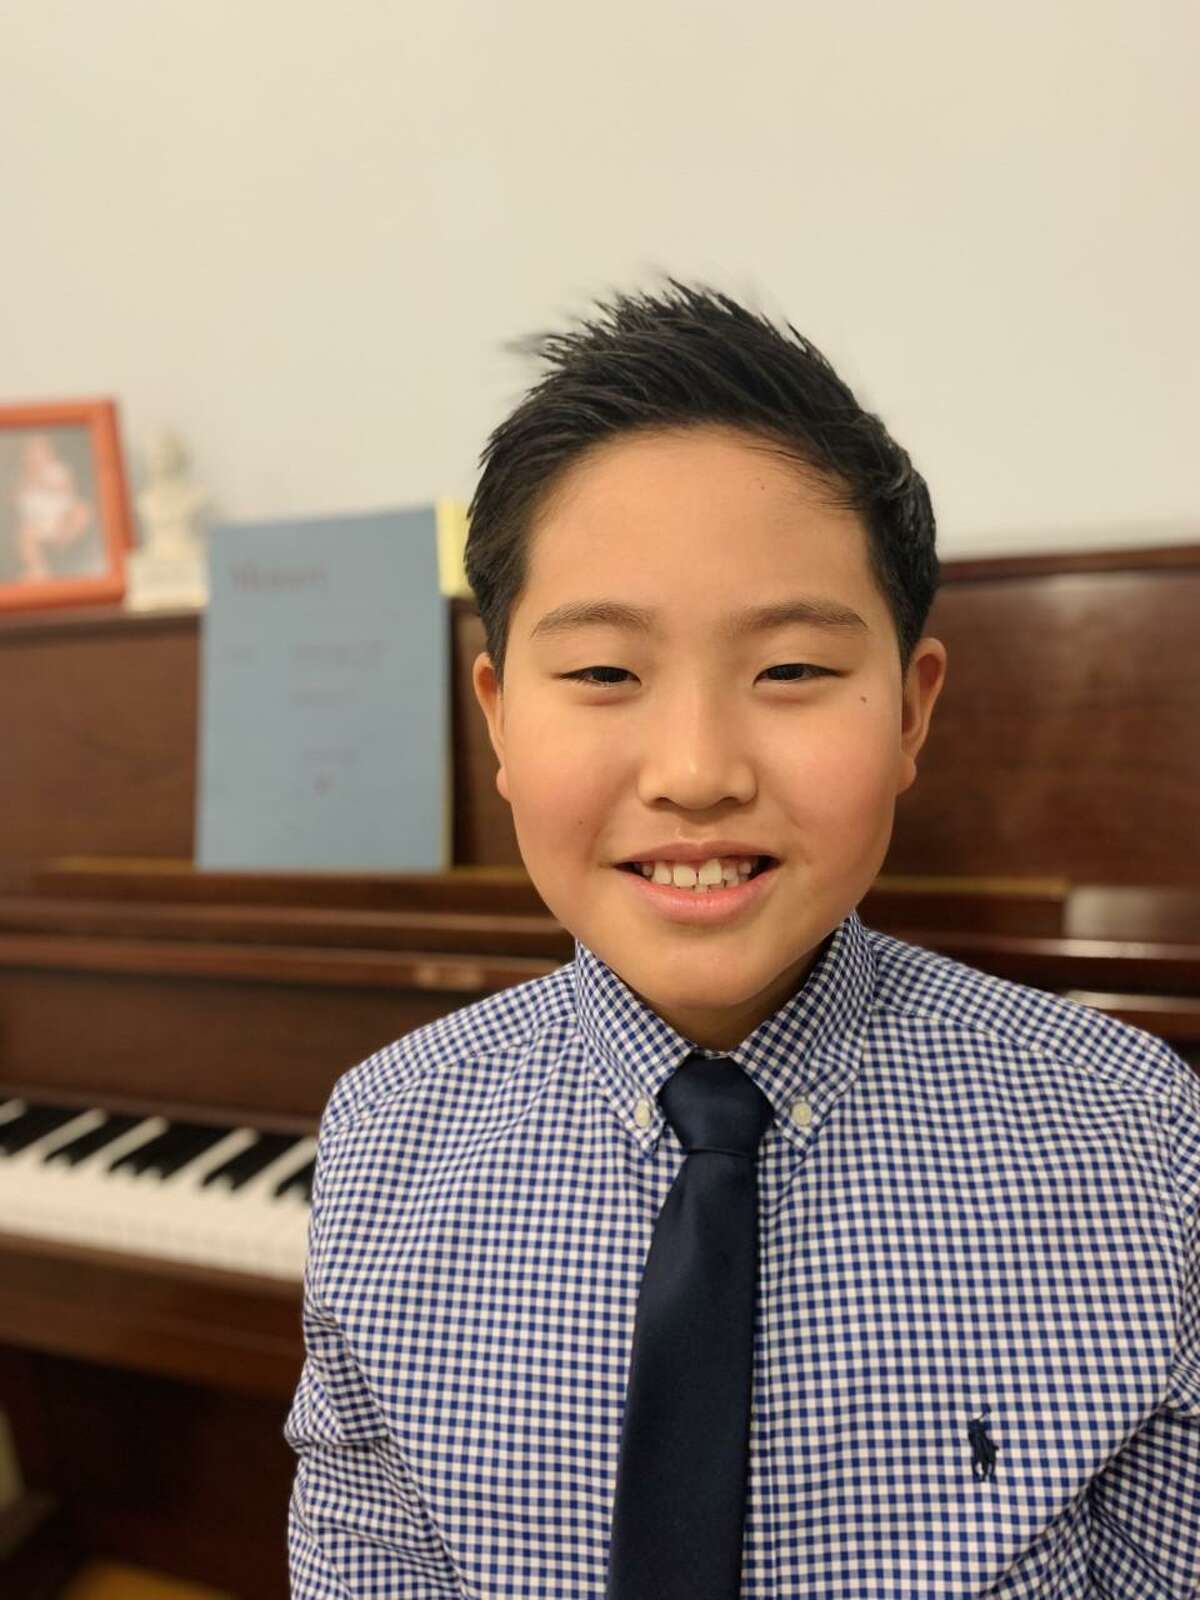 Shelton Pianist Minho Chung will be among the advanced students of pianist Kyong Hee Cho performing in the 15th Annual Playing by Heart benefit concert on Dec. 11, 2021, at the Faust Harrison Piano Store, 322 Black Rock Turnpike, Fairfield. The concert will begin at 6 p.m.